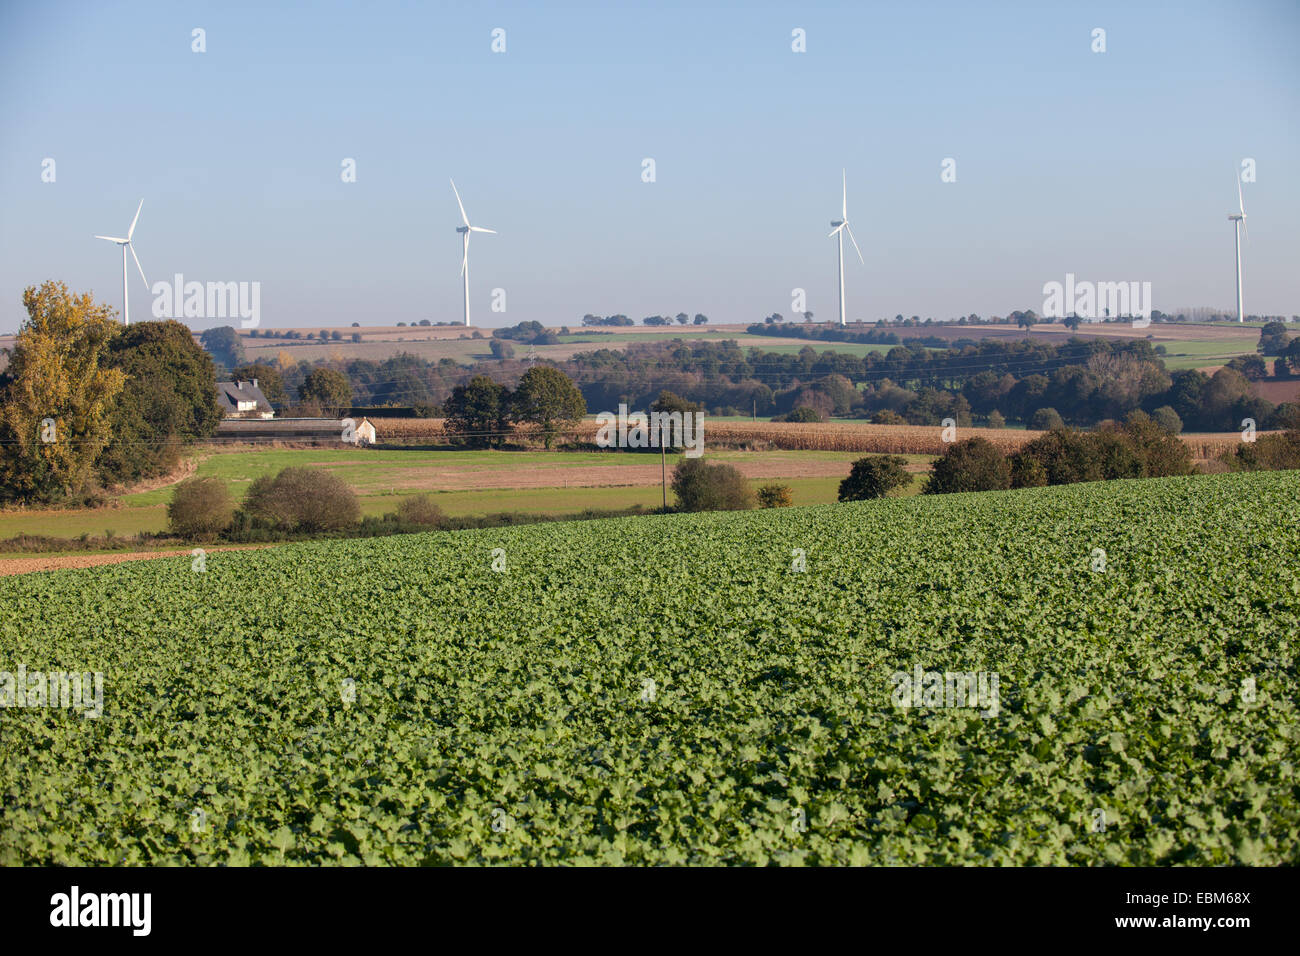 Fertile land producing verdant crops with wind turbines on the horizon Stock Photo